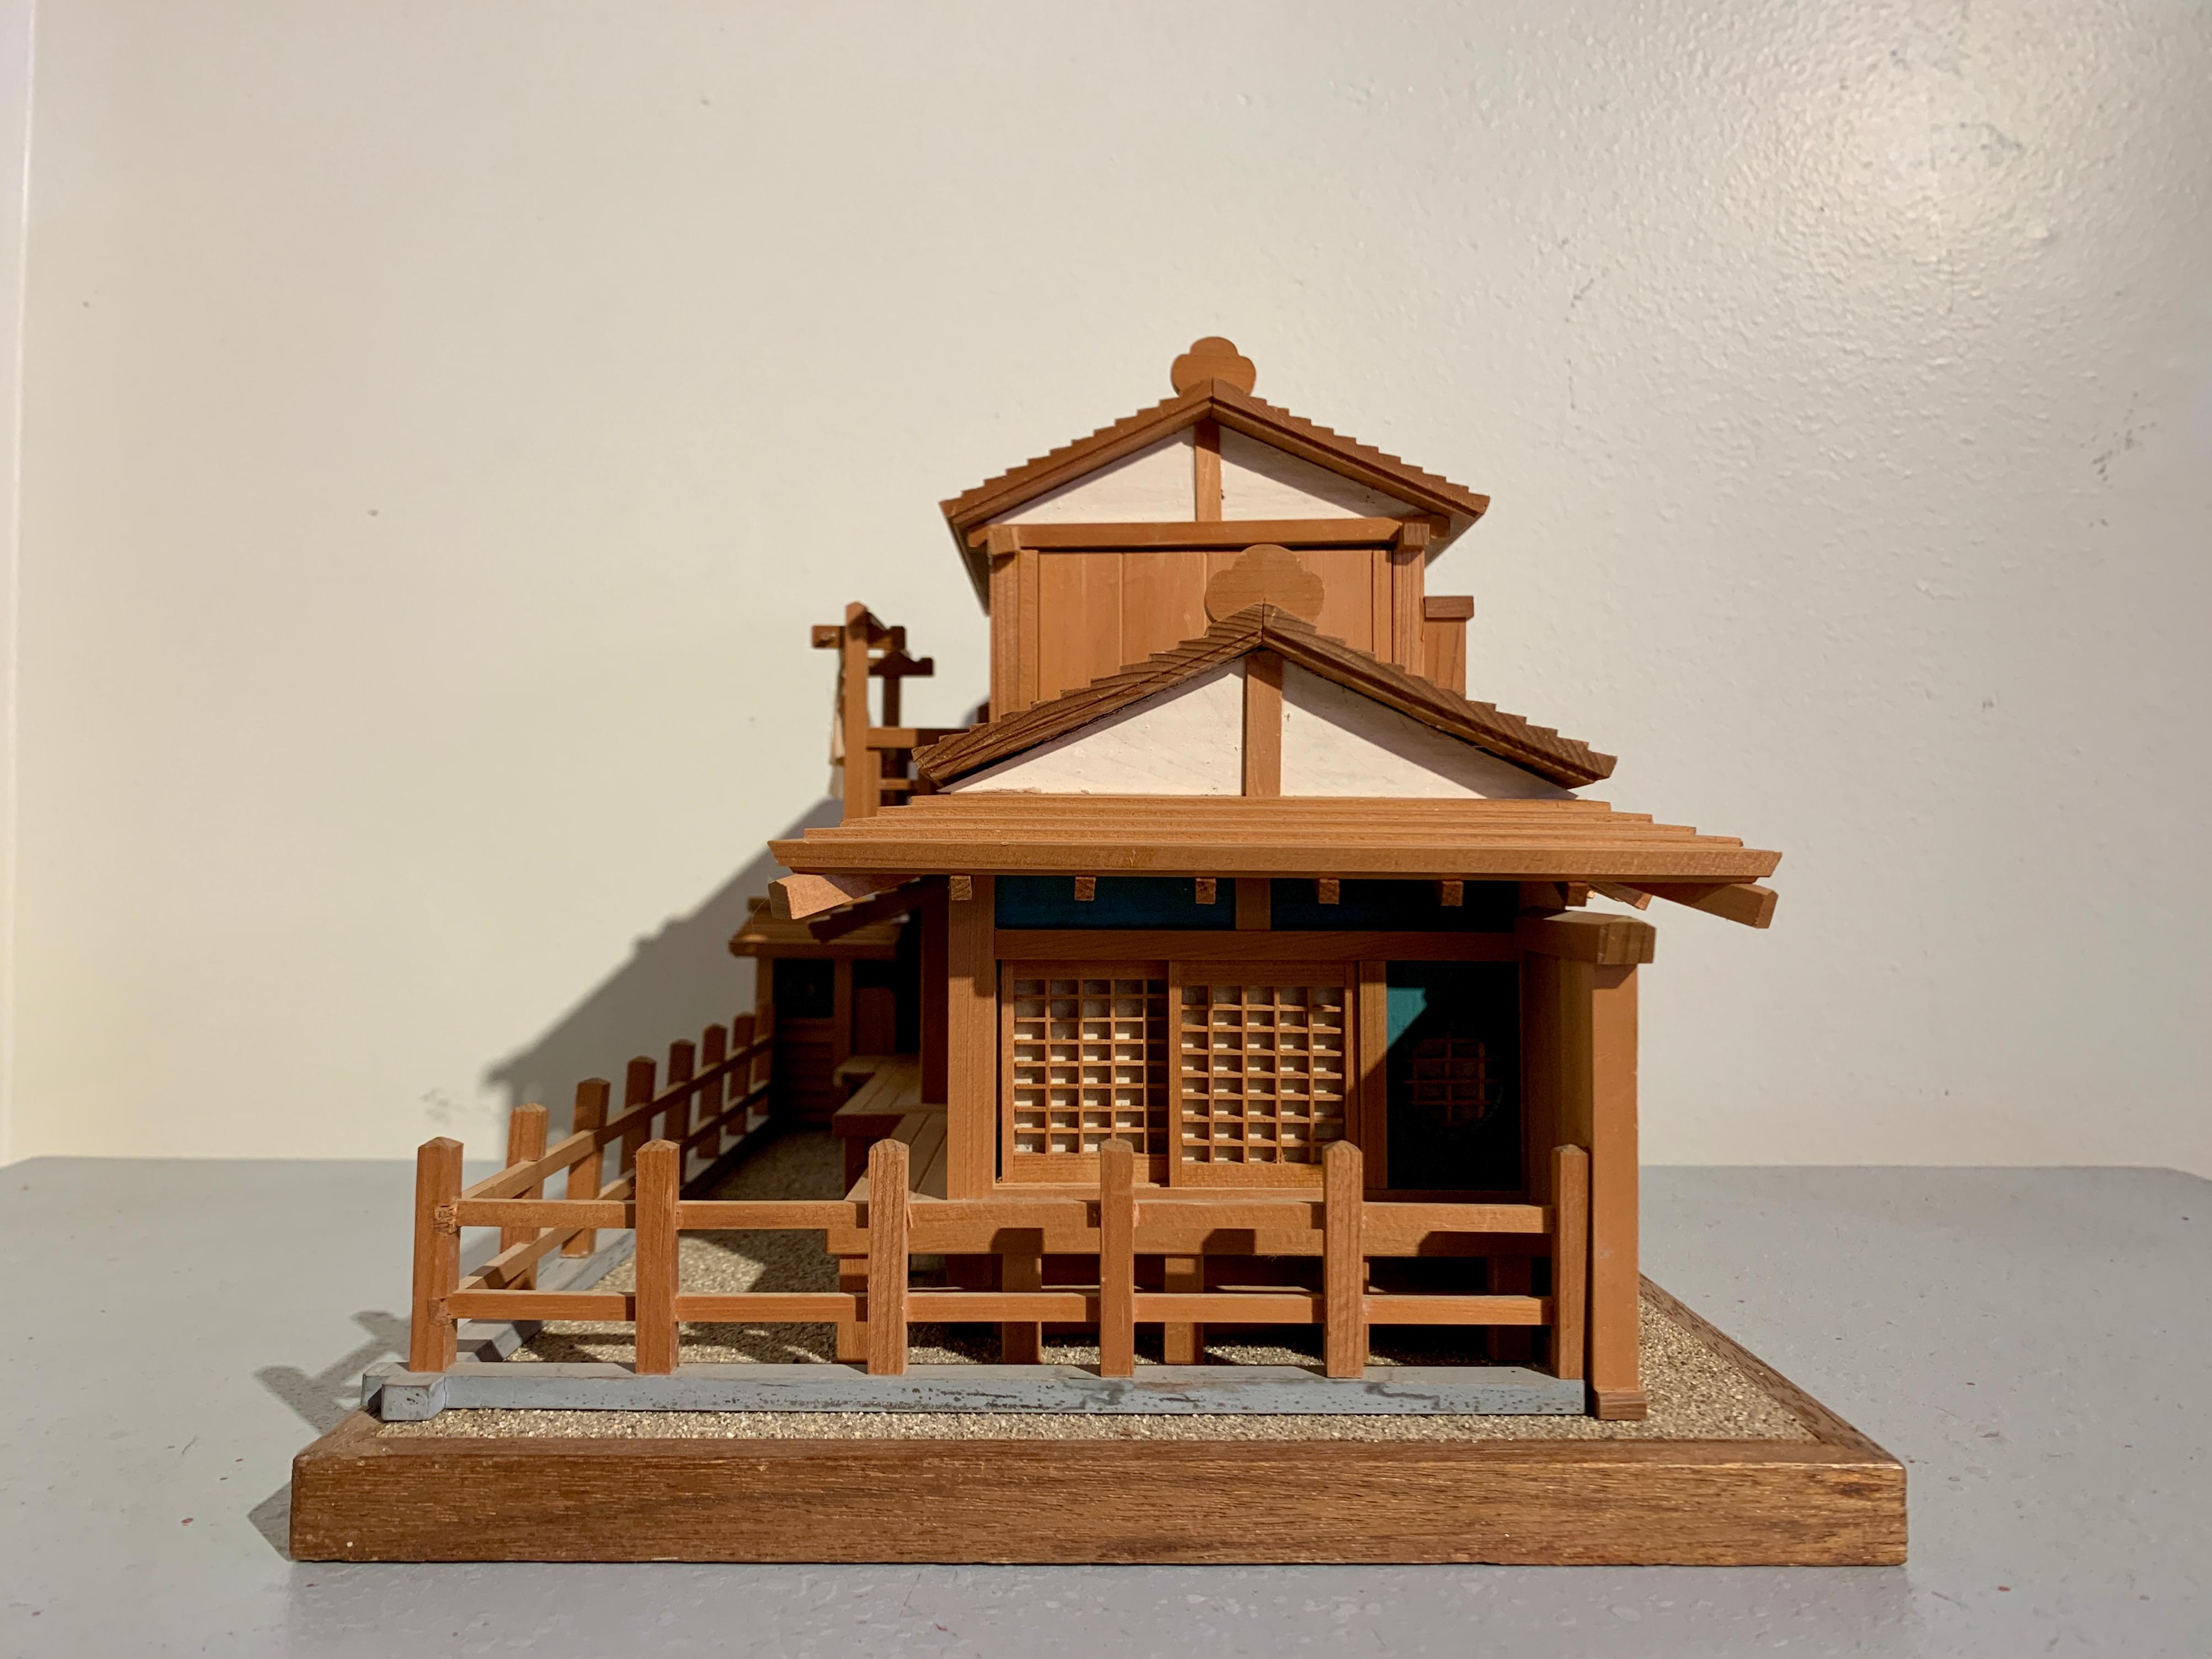 A delightful vintage wooden model of a traditional Japanese home, mid 20th century, circa 1950's, Japan.

The architectural model depicts a traditional Japanese home, with removable roofs, papered shoji doors, and a fenced yard. The two roofs are